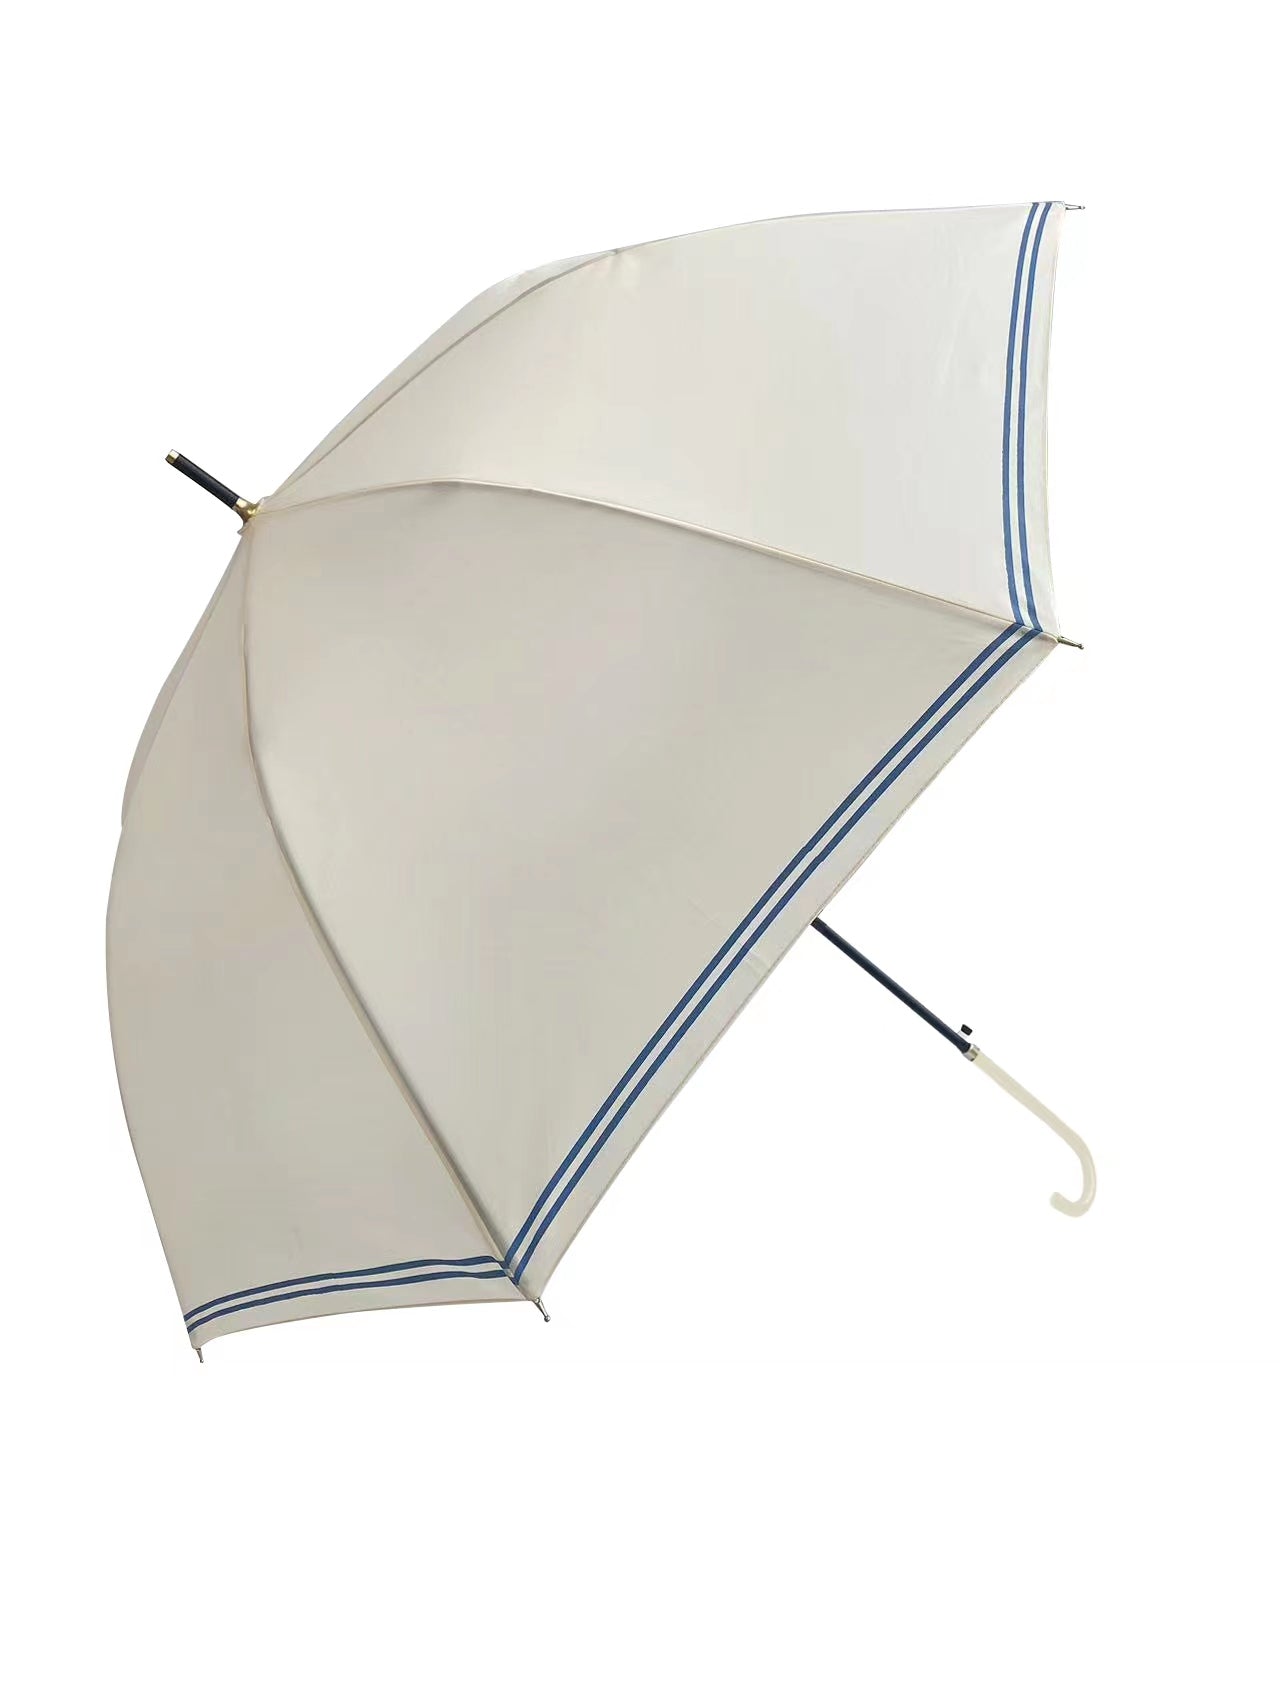 MINISO LADY'S STRIPED LONG-HANDLED UMBRELLA 2015021810109 LIFE DEPARTMENT